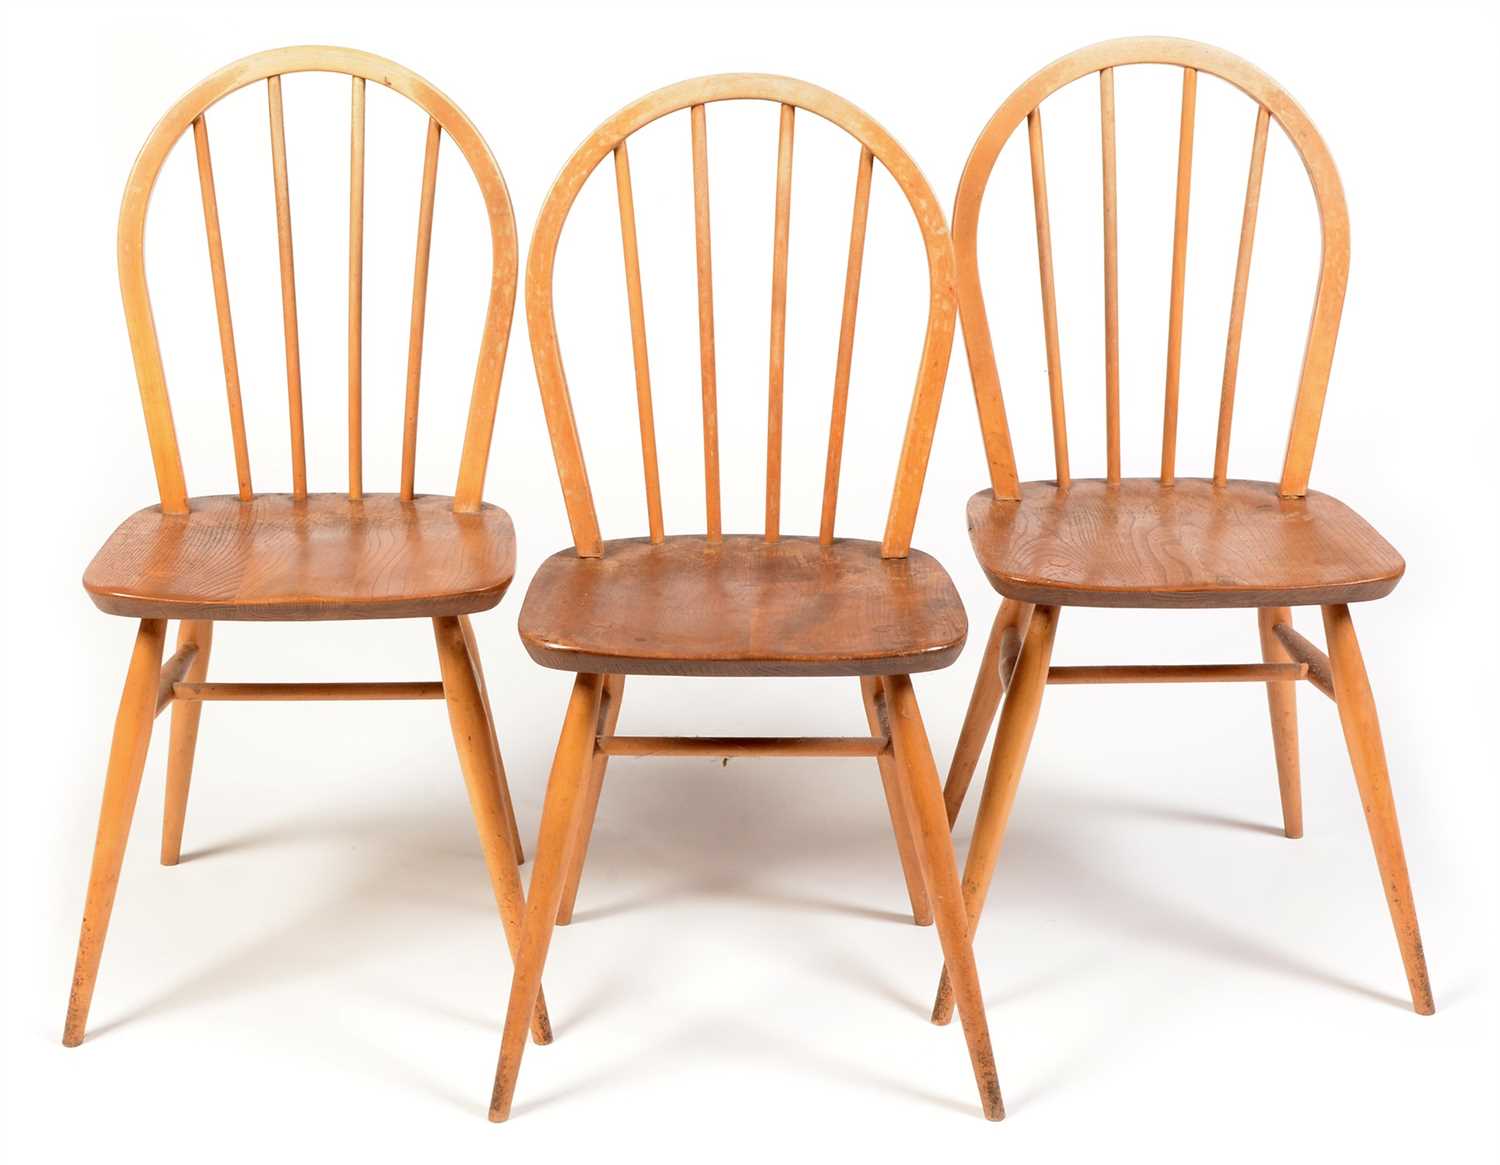 Lot 1602 - Three Ercol Windsor dining chairs.